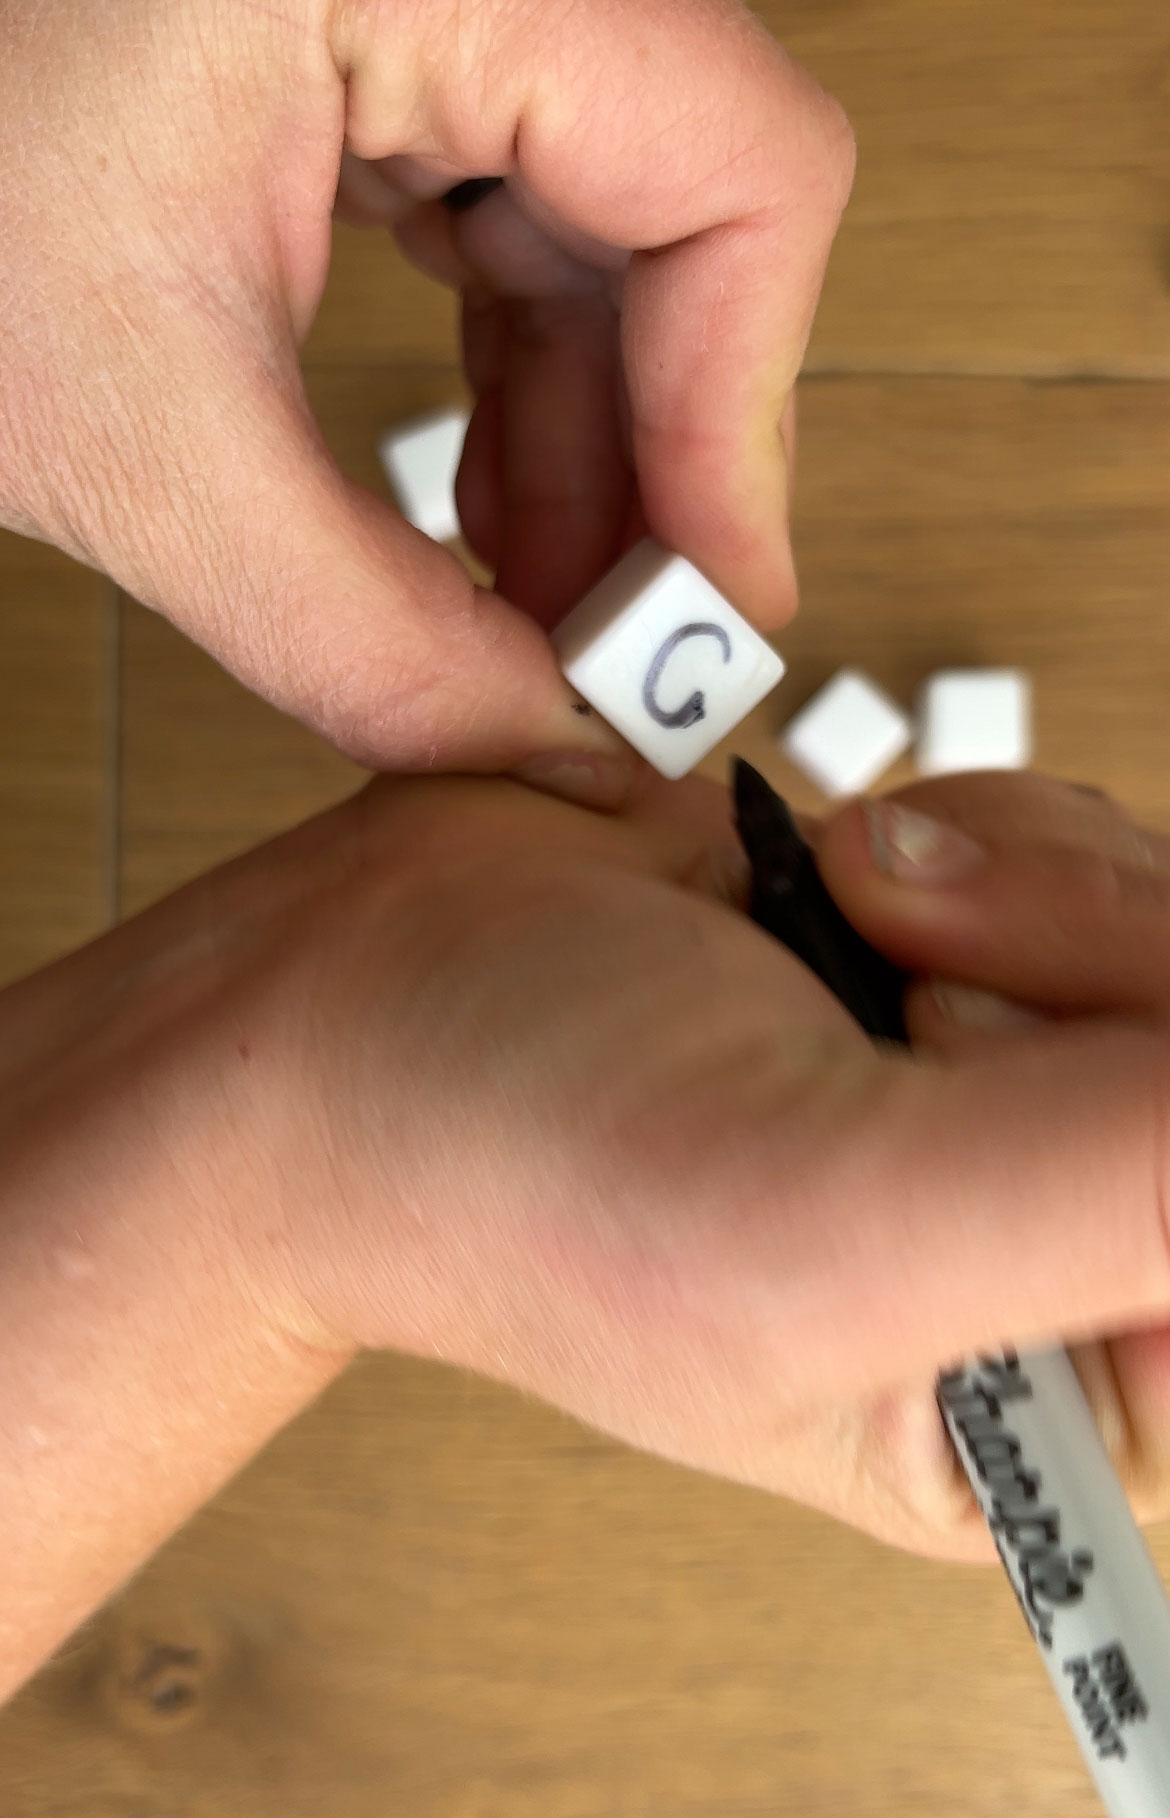 woman writing on a dice